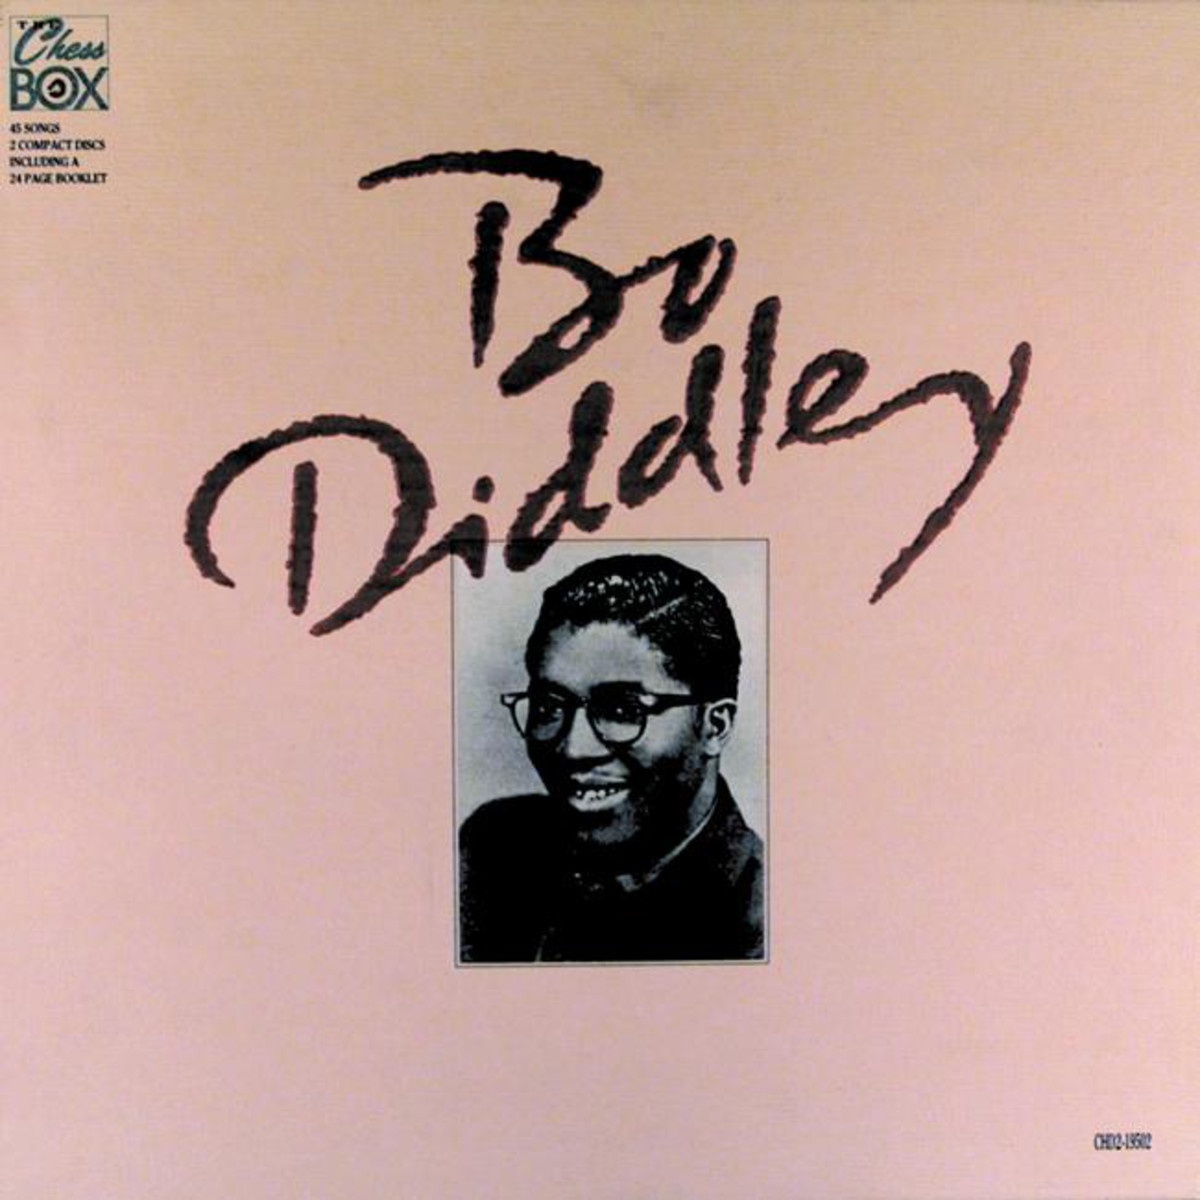 The Story Of Bo Diddley